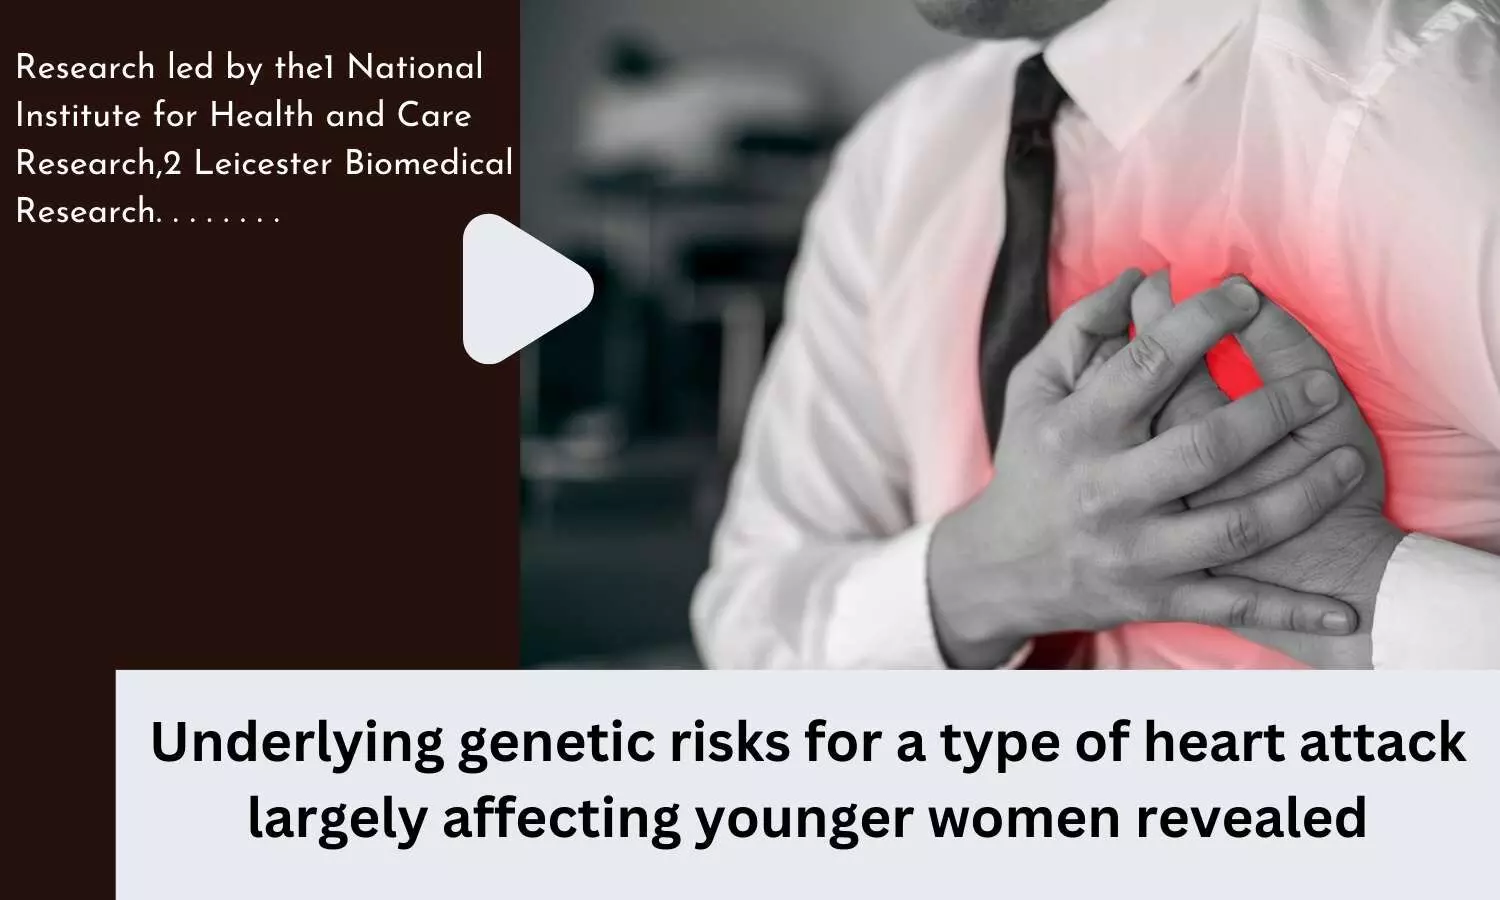 Underlying genetic risks for a type of heart attack largely affecting younger women revealed